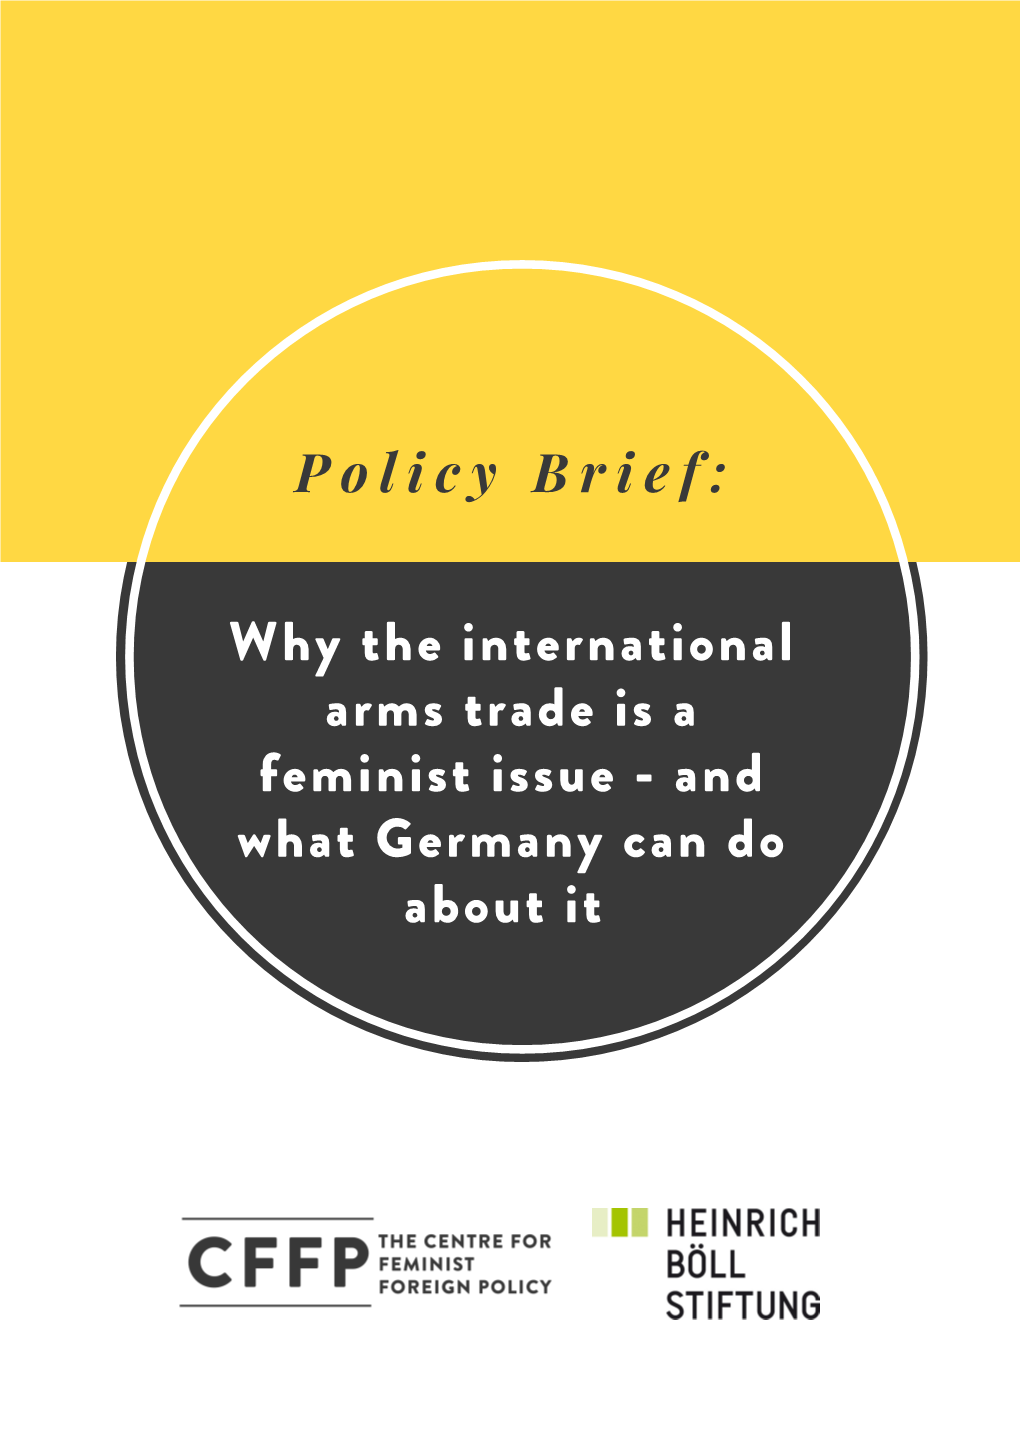 Why the International Arms Trade Is a Feminist Issue - and What Germany Can Do About It November 2020